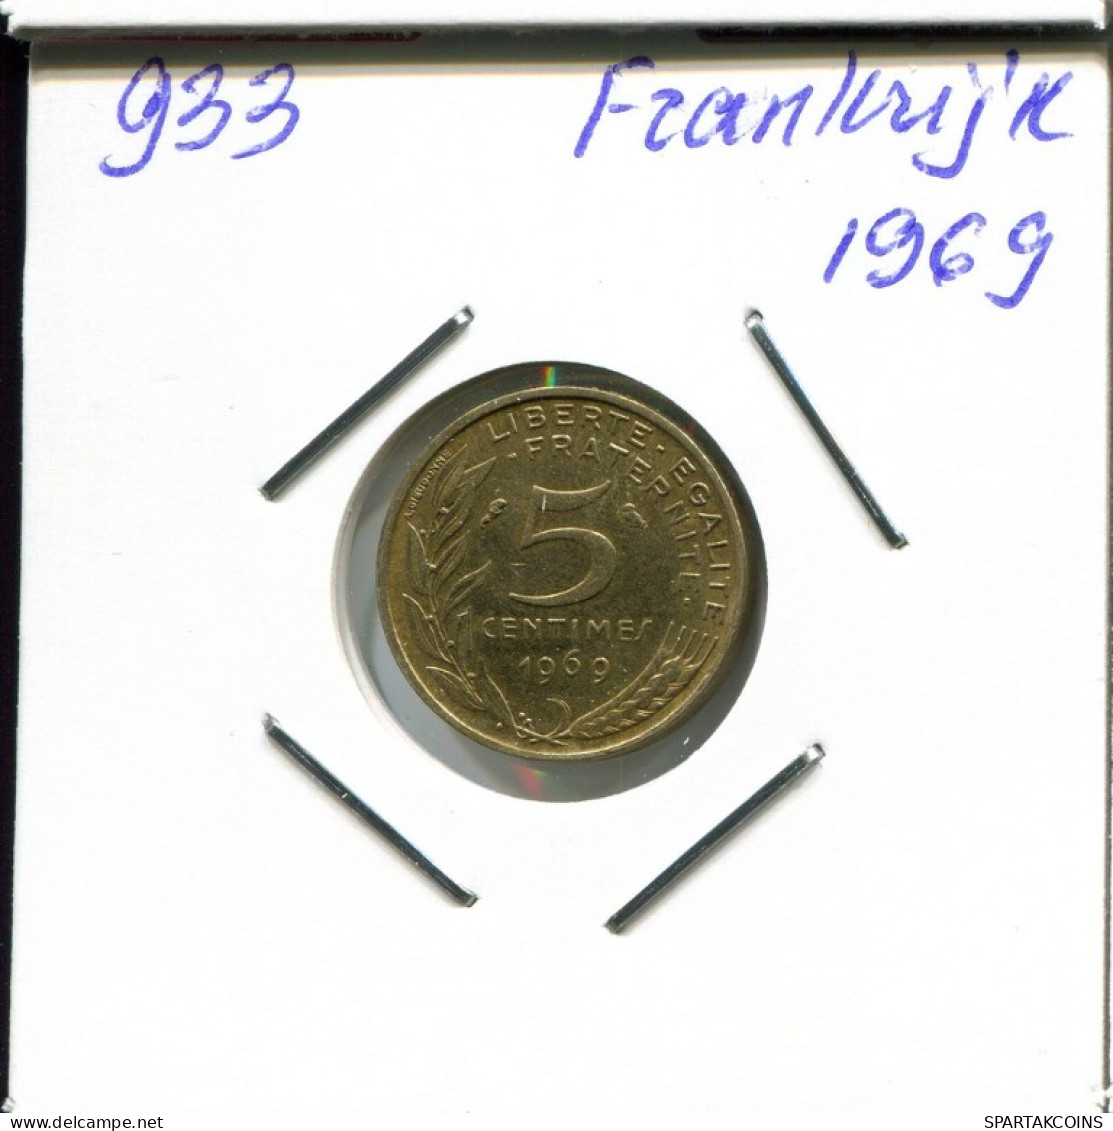 5 CENTIMES 1969 FRANCE Coin French Coin #AN011.U.A - 5 Centimes